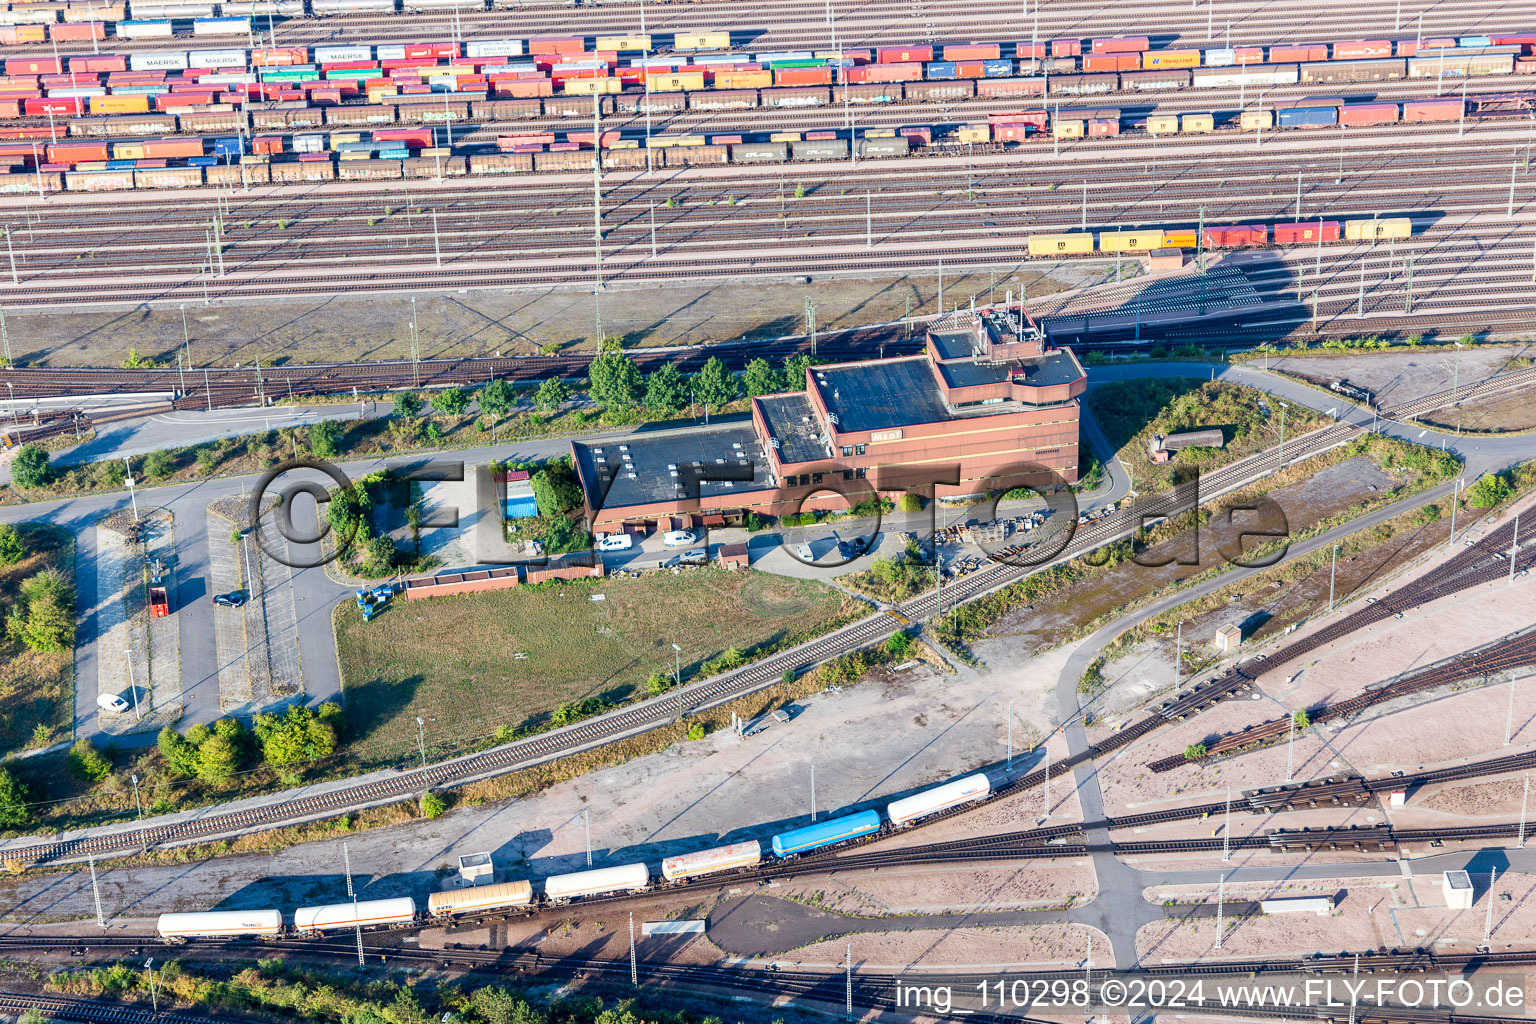 Bird's eye view of Marshalling yard and freight station Maschen of the Deutsche Bahn in the district Maschen in Seevetal in the state Lower Saxony, Germany